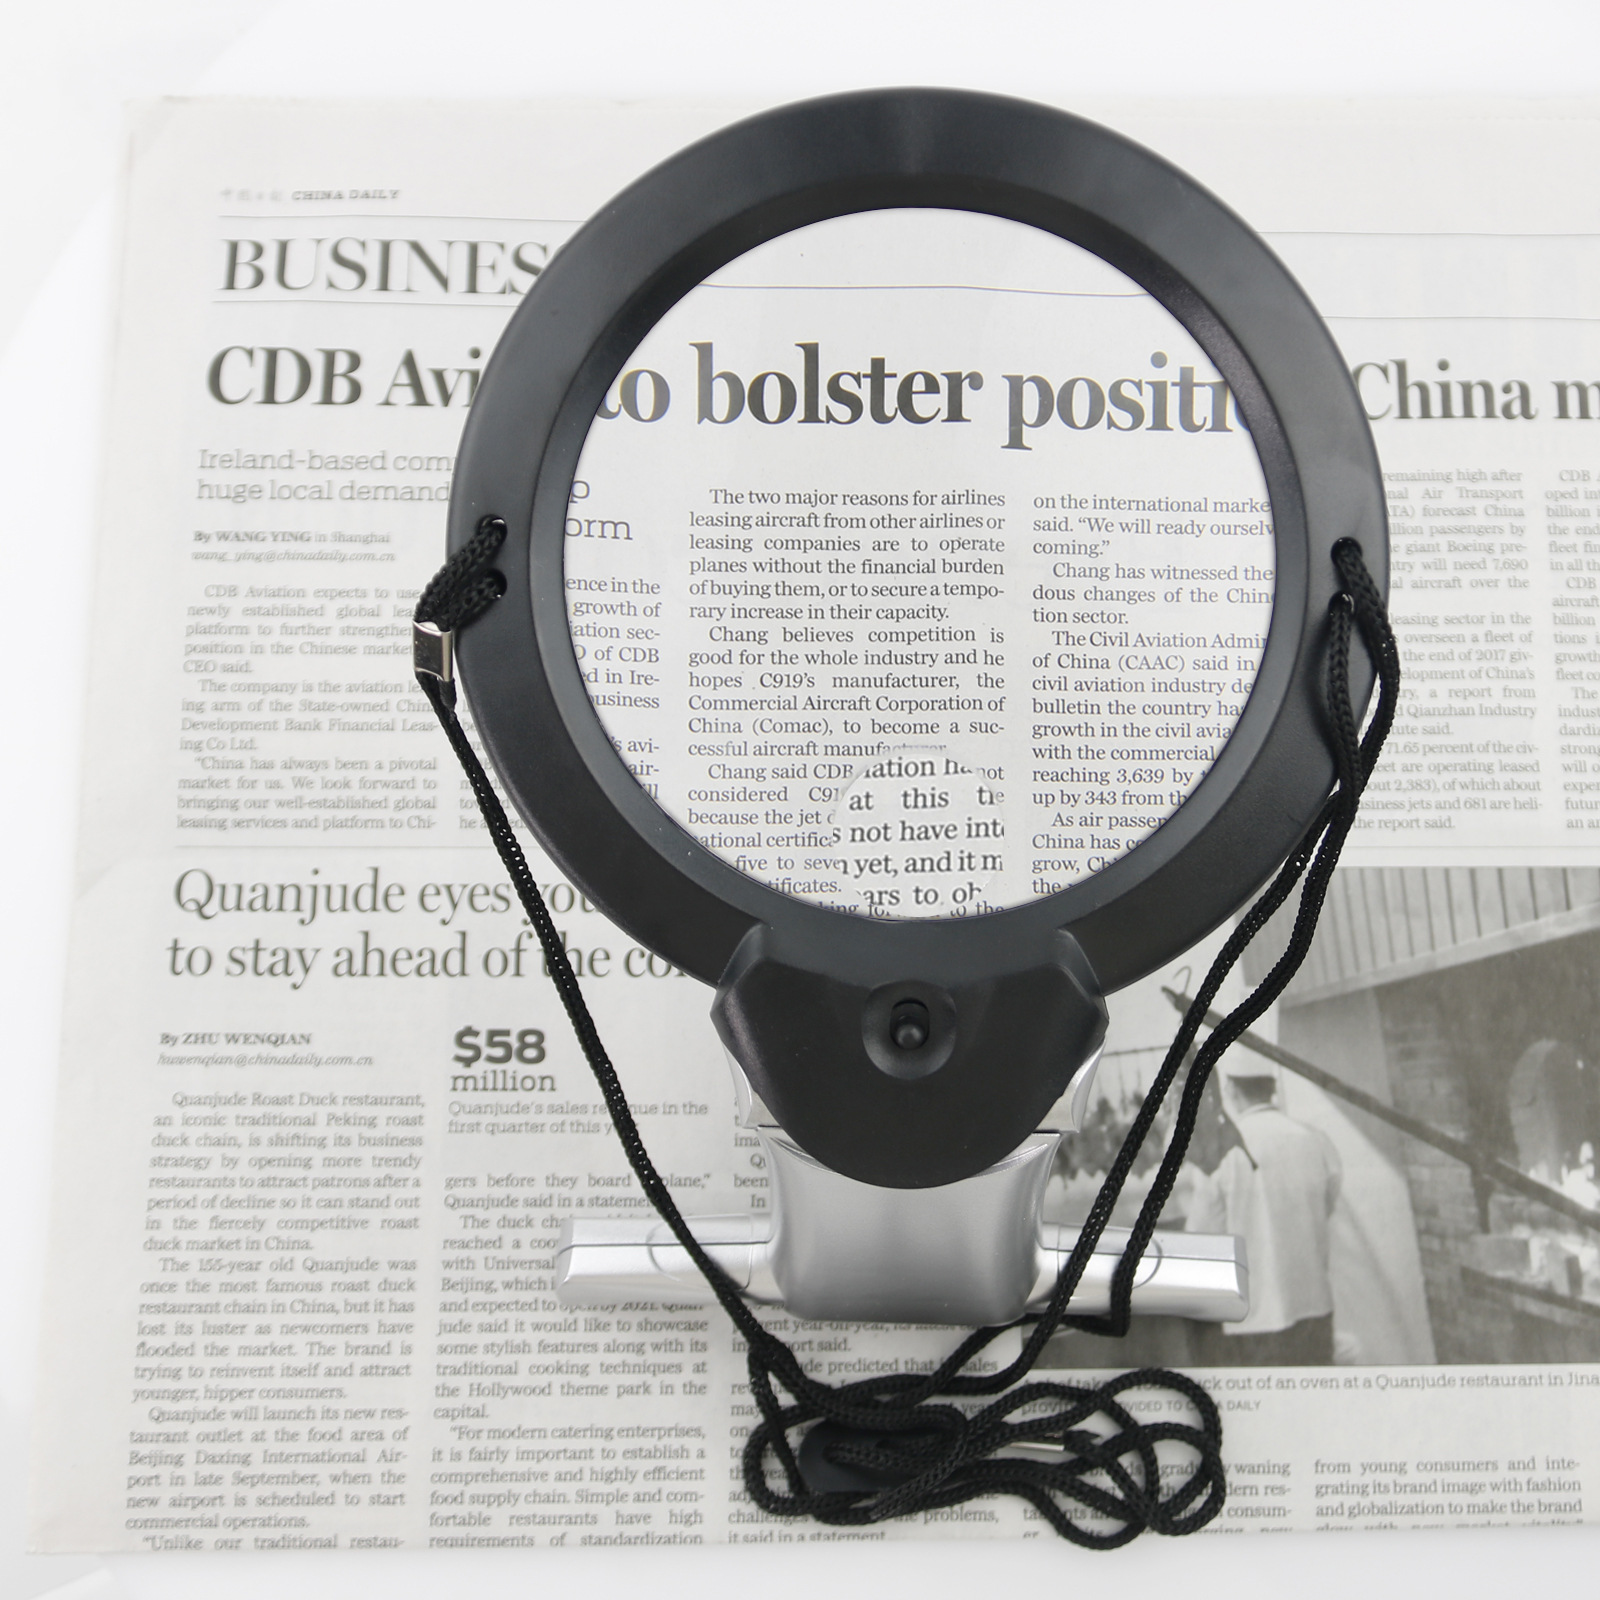 2X 6X Portable Loupe Handheld Reading Illuminated Magnifier - Click Image to Close